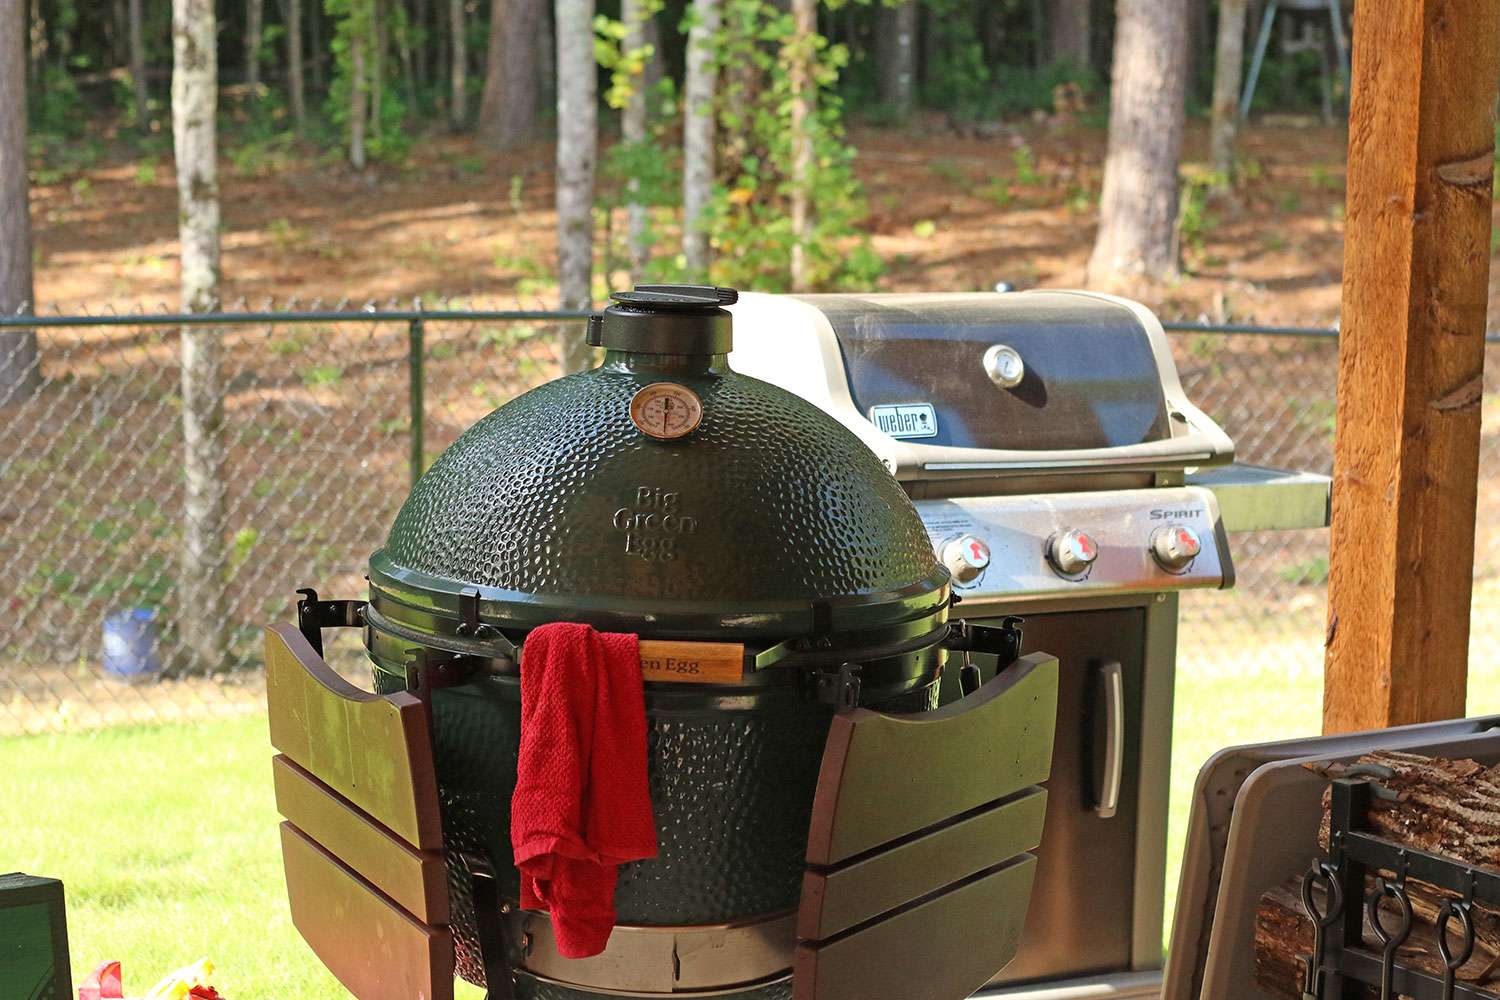 He's got a regular gas grill, a charcoal grill somewhere, a Green Egg and a Masterbuilt smoker. He's prepared for just about anything.